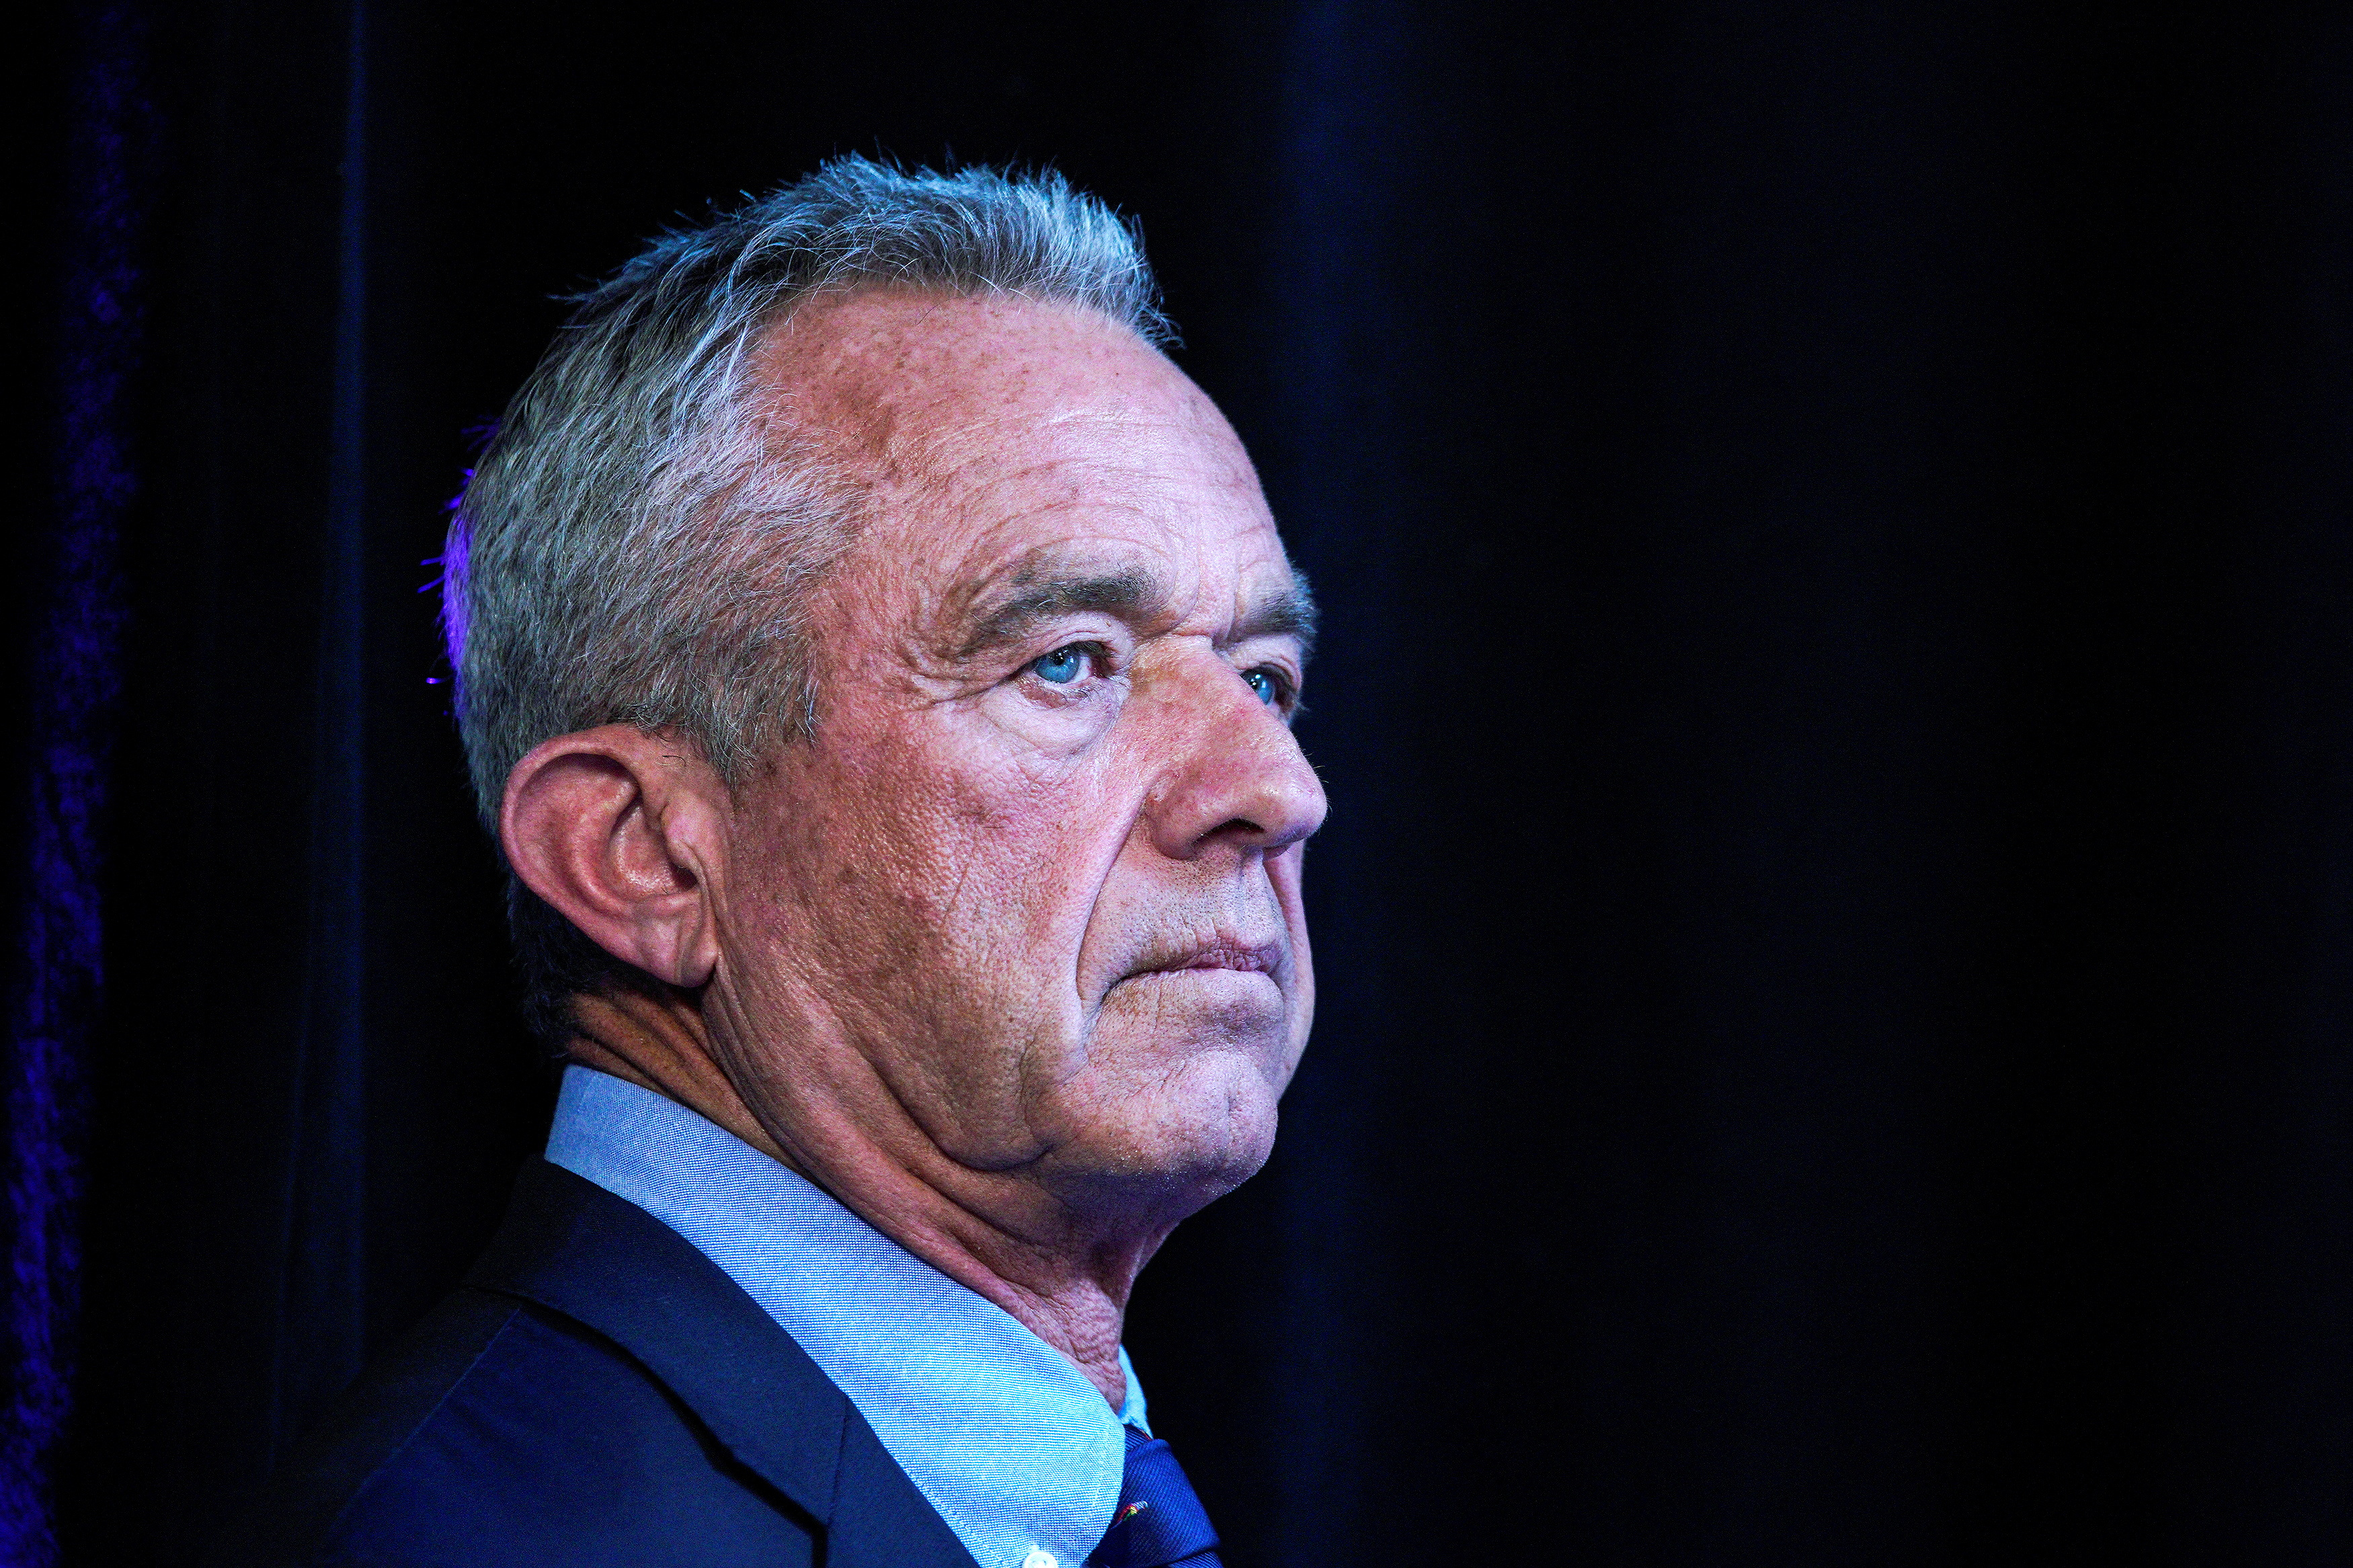 rfk jr. revealed he had a parasitic brain worm. here’s what to know.